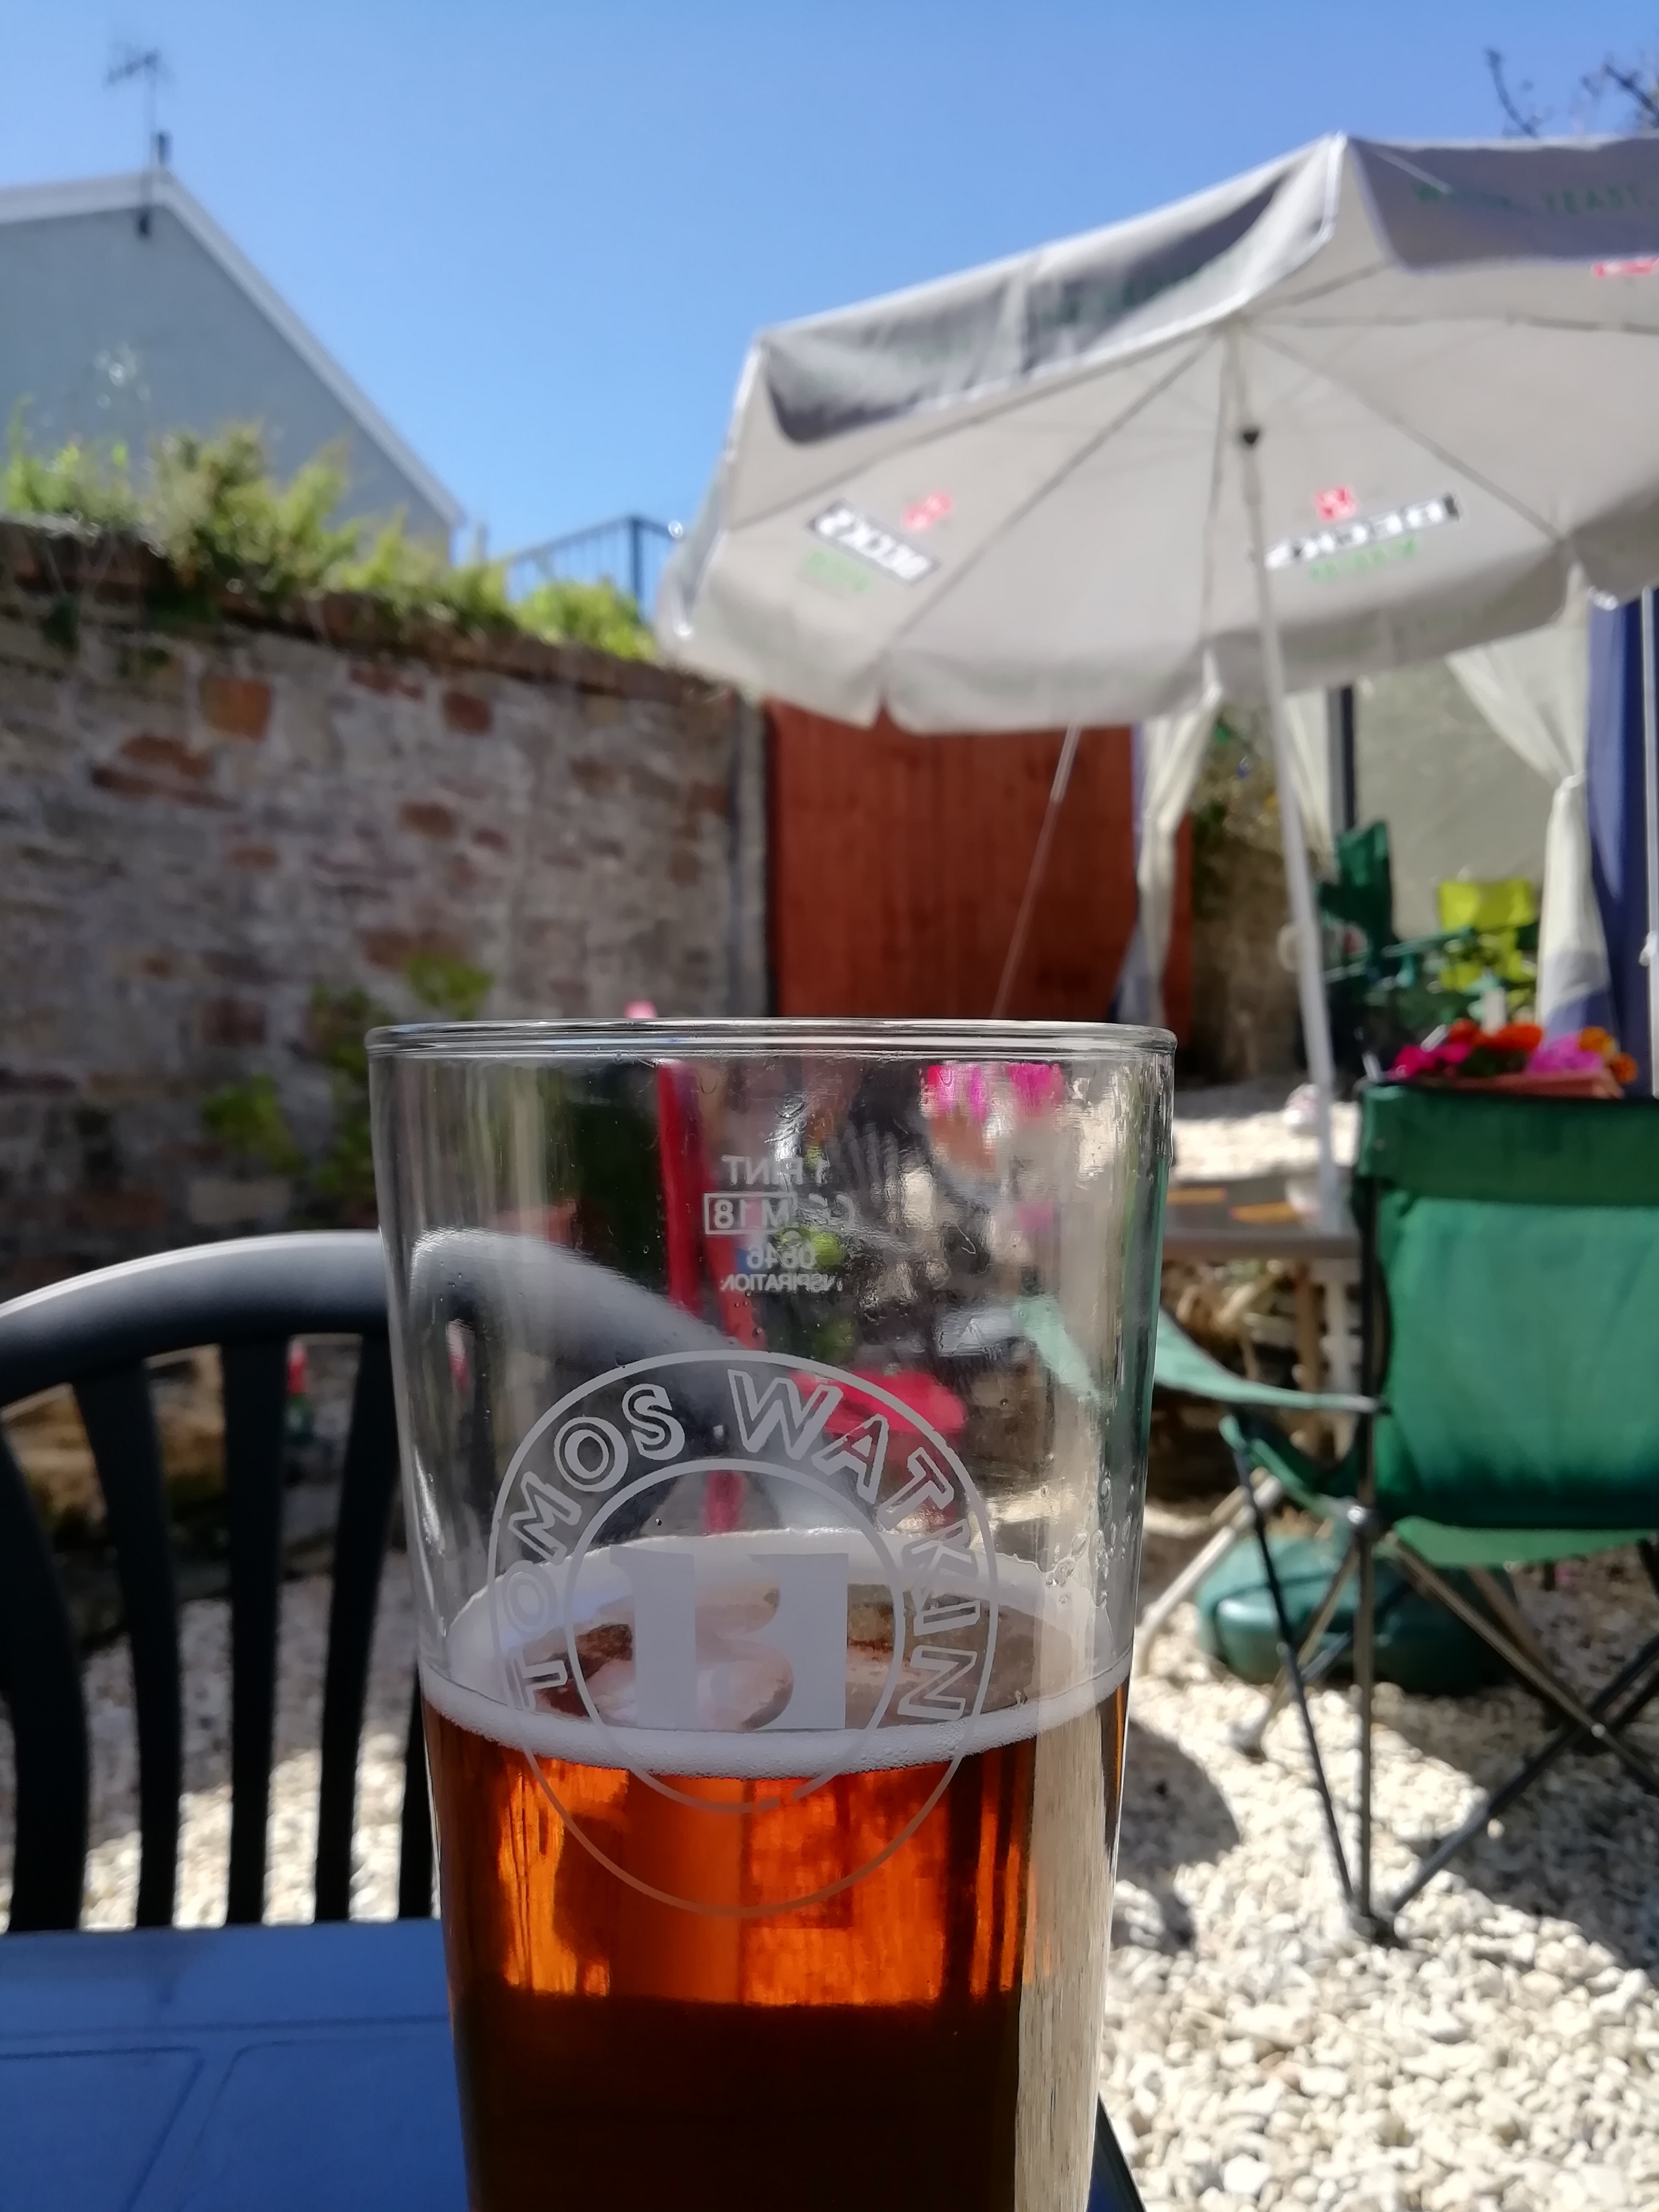 A beer, tables and parasols in the garden of the Wern Fawr